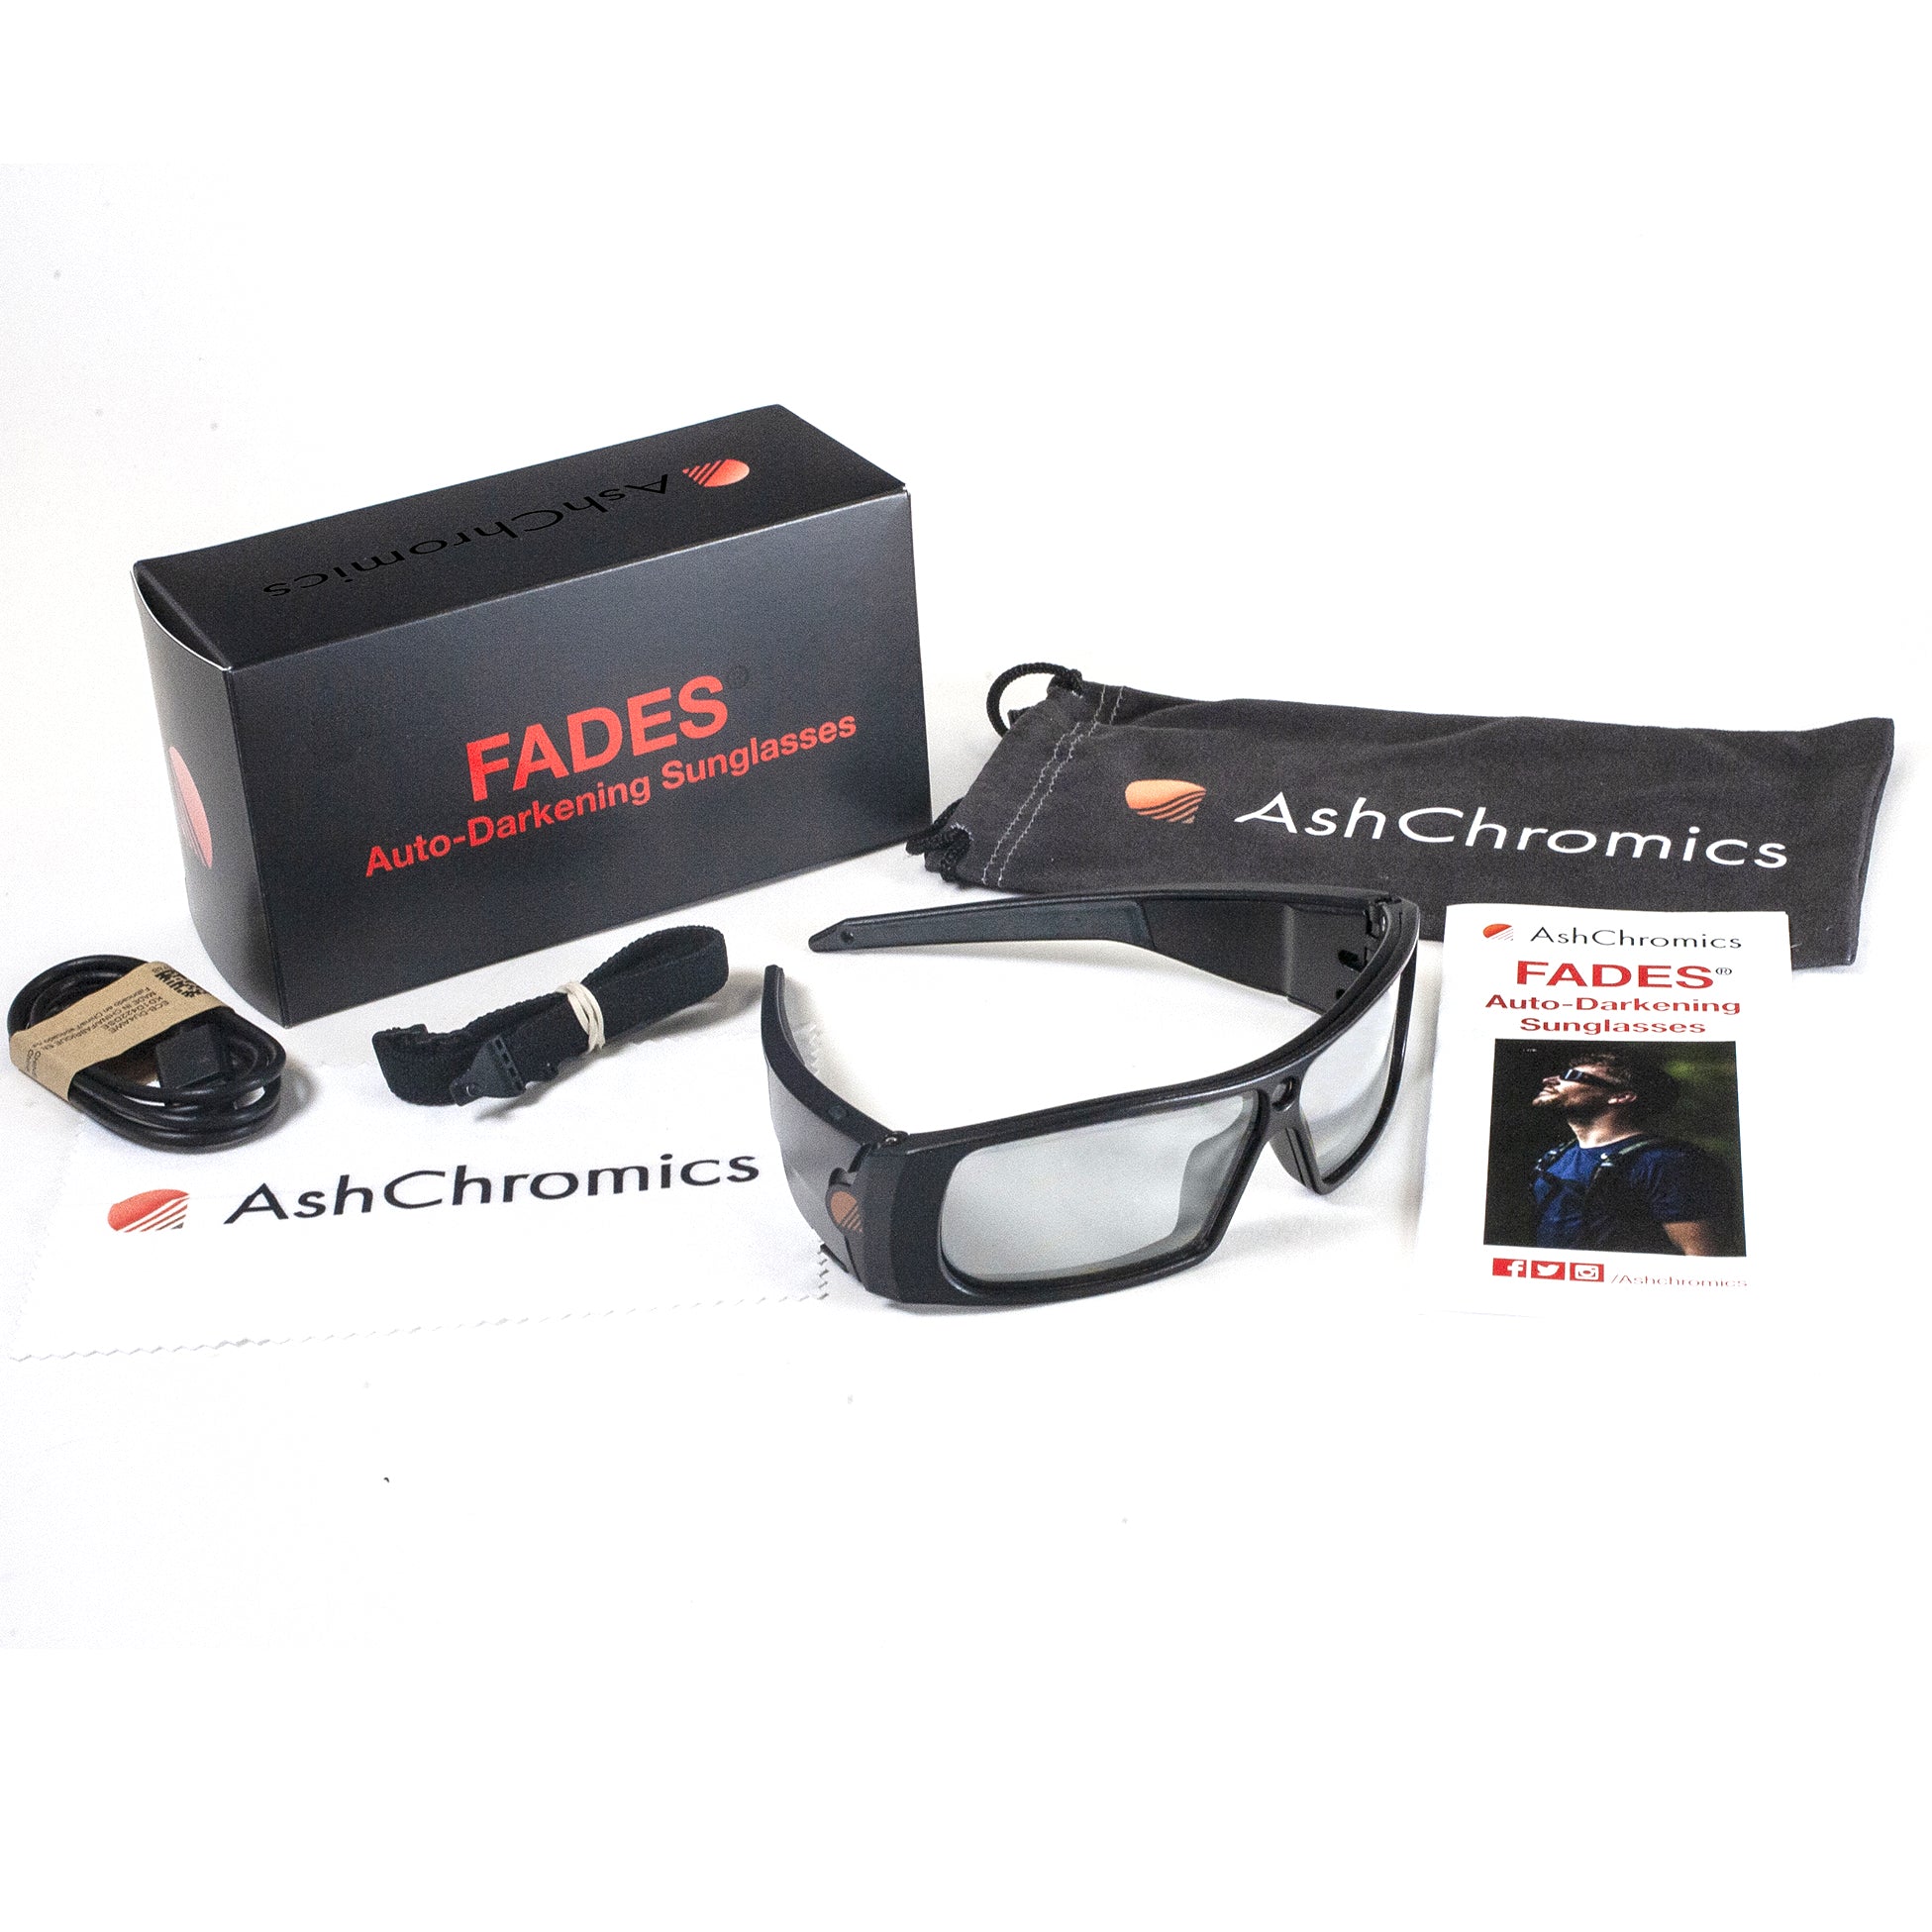 Fades Professional Auto Dimming Golf Sunglasses Package